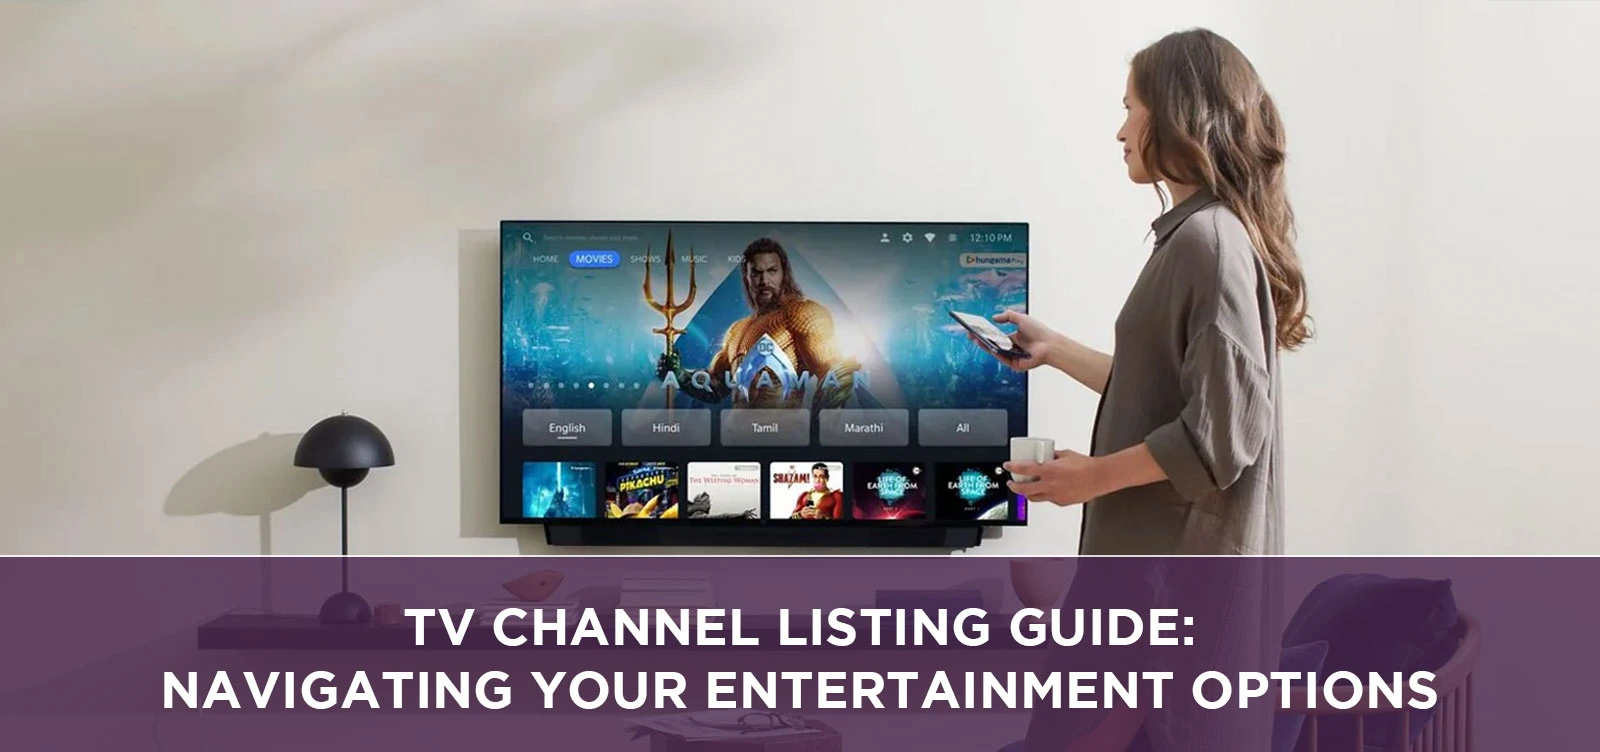 TV Channel Listing Guide: Navigating Your Entertainment Options